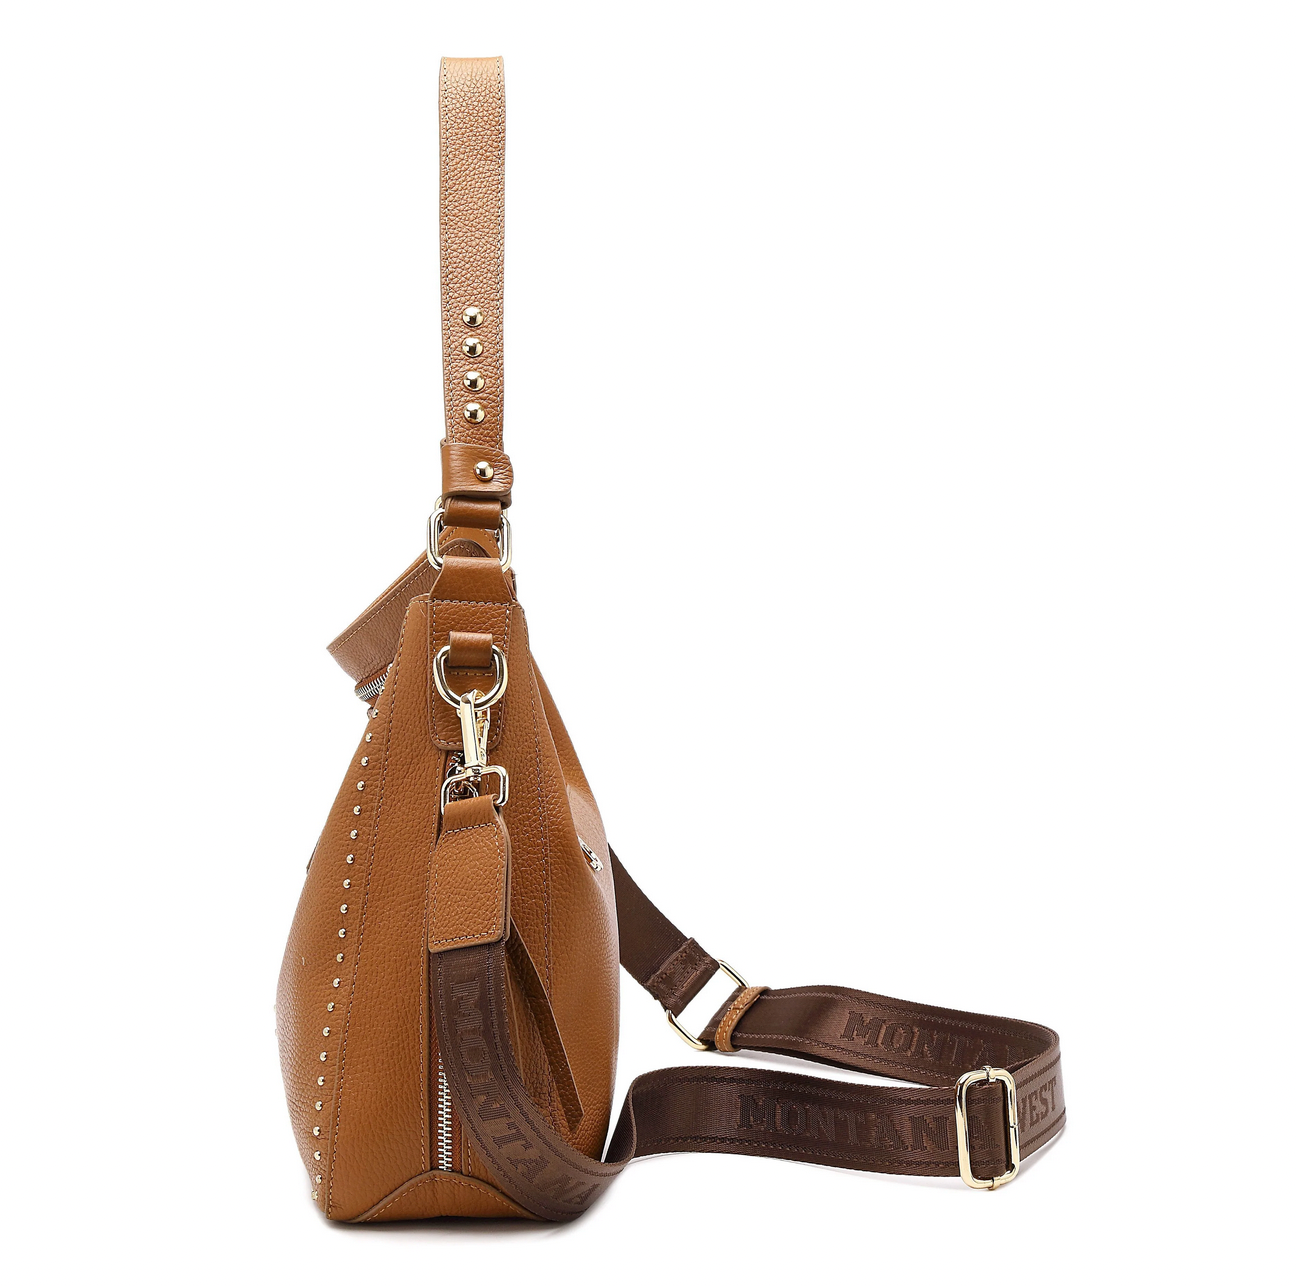 Montana West Right/Left Handed Brown CC Crossbody Hobo